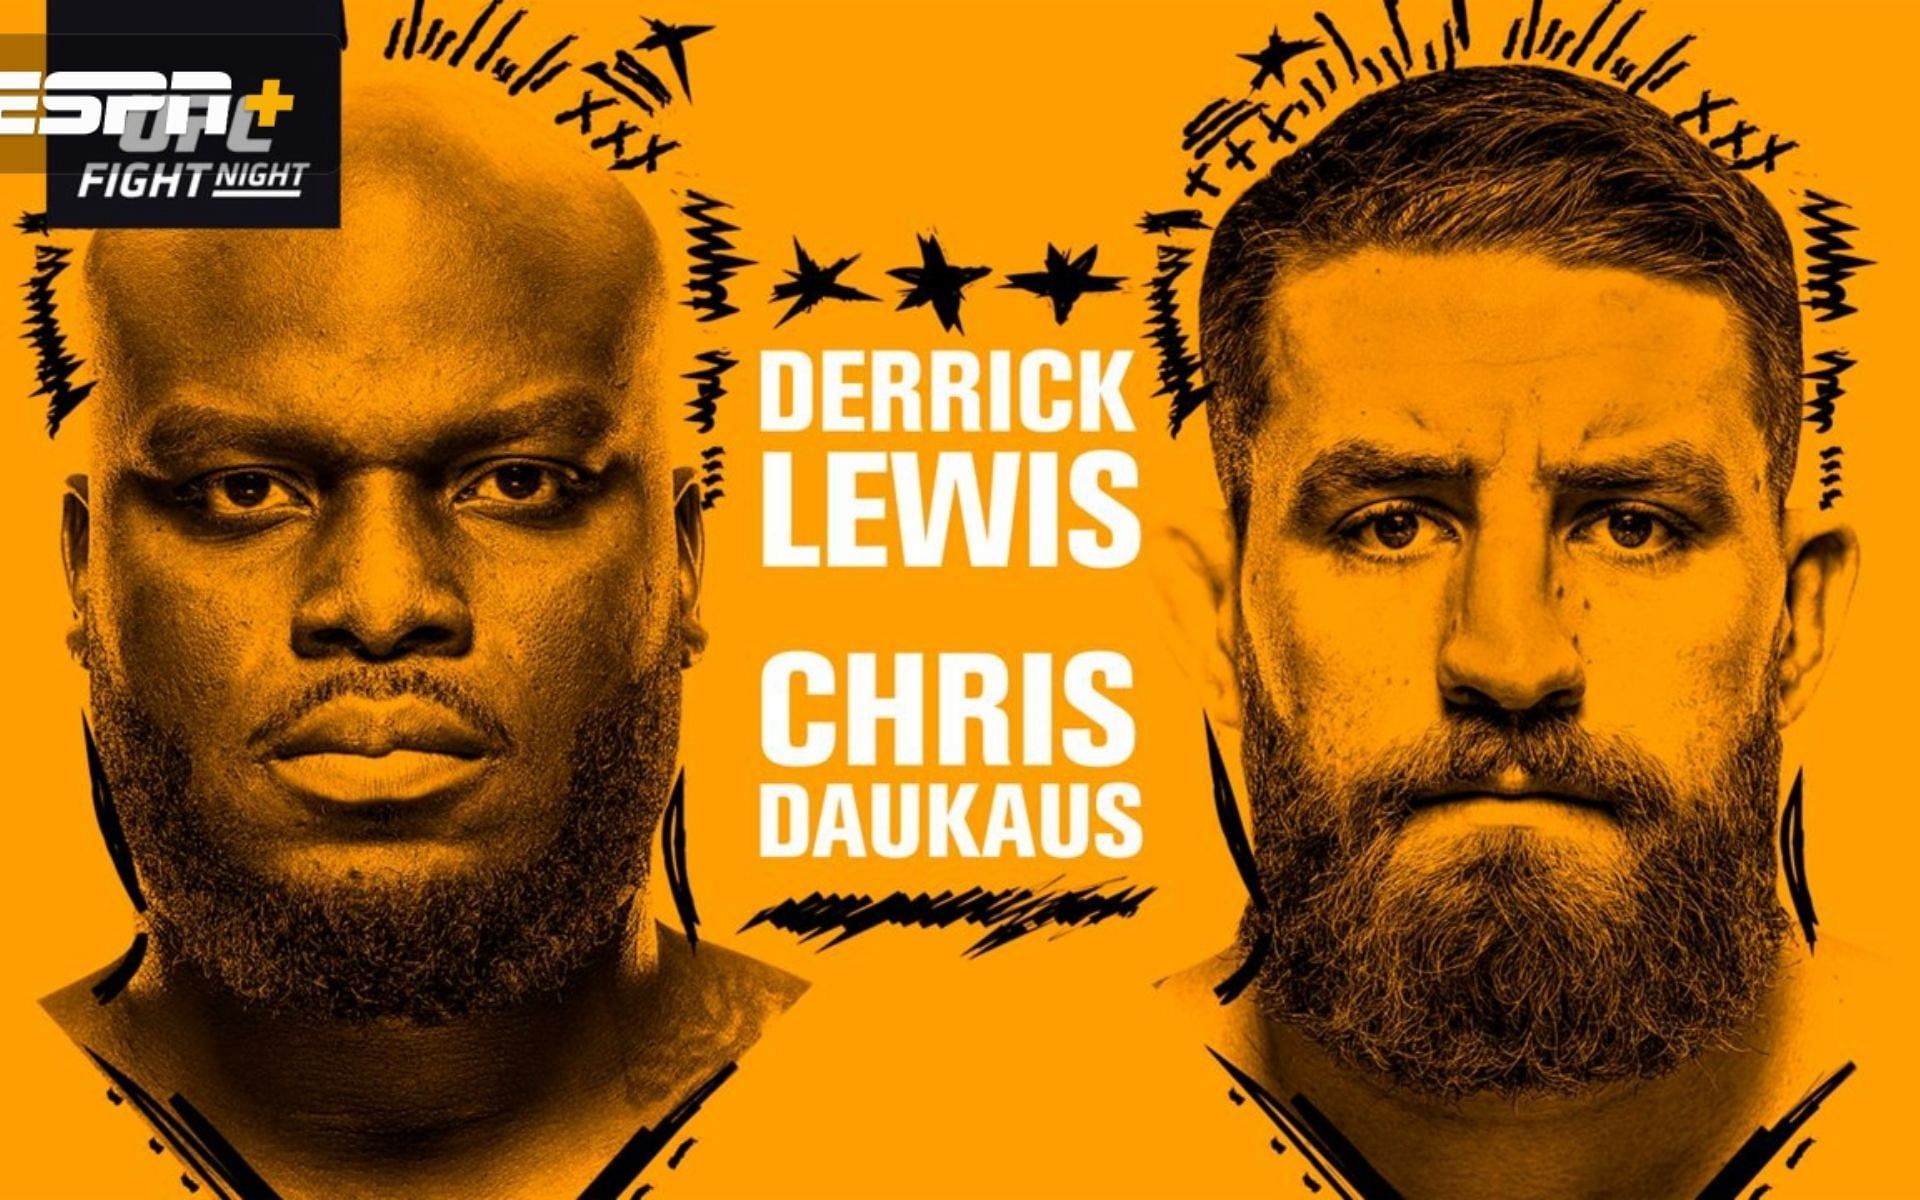 Chris Daukaus takes on Derrick Lewis in the headliner of the final UFC show of 2021 this weekend